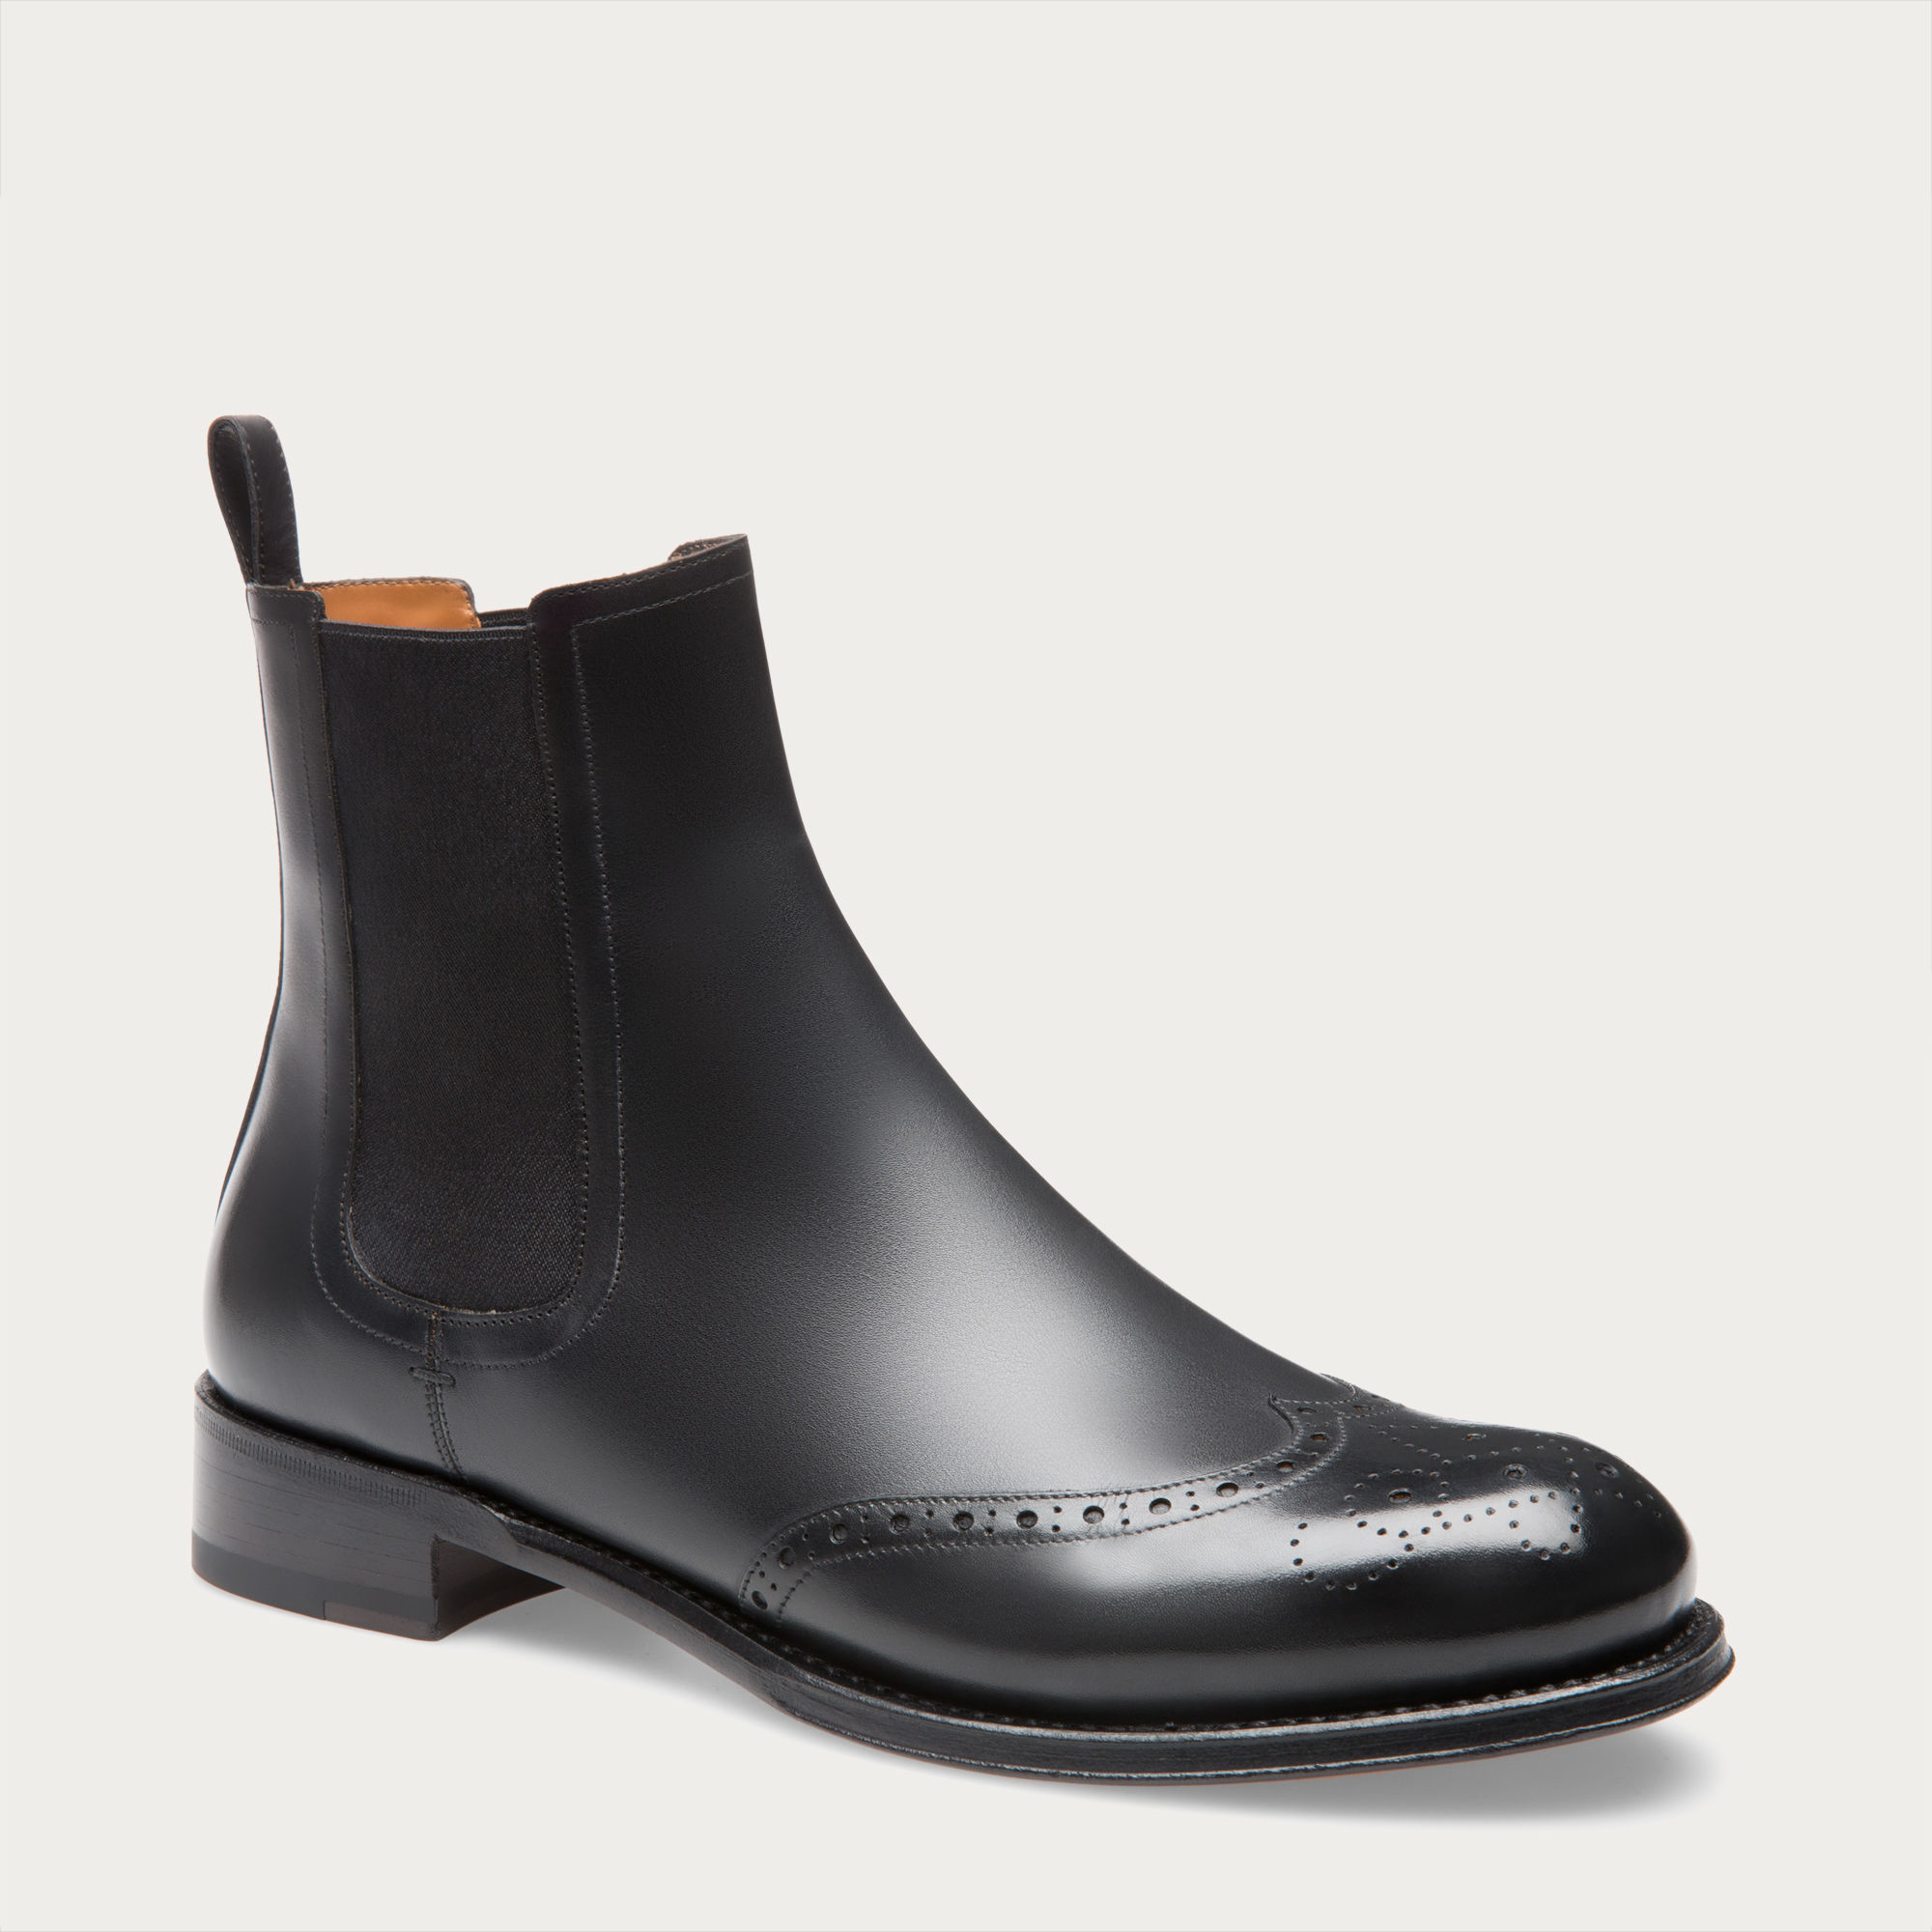 Lyst - Bally Bagia Women ́s Leather Chelsea Boot In Black in Black